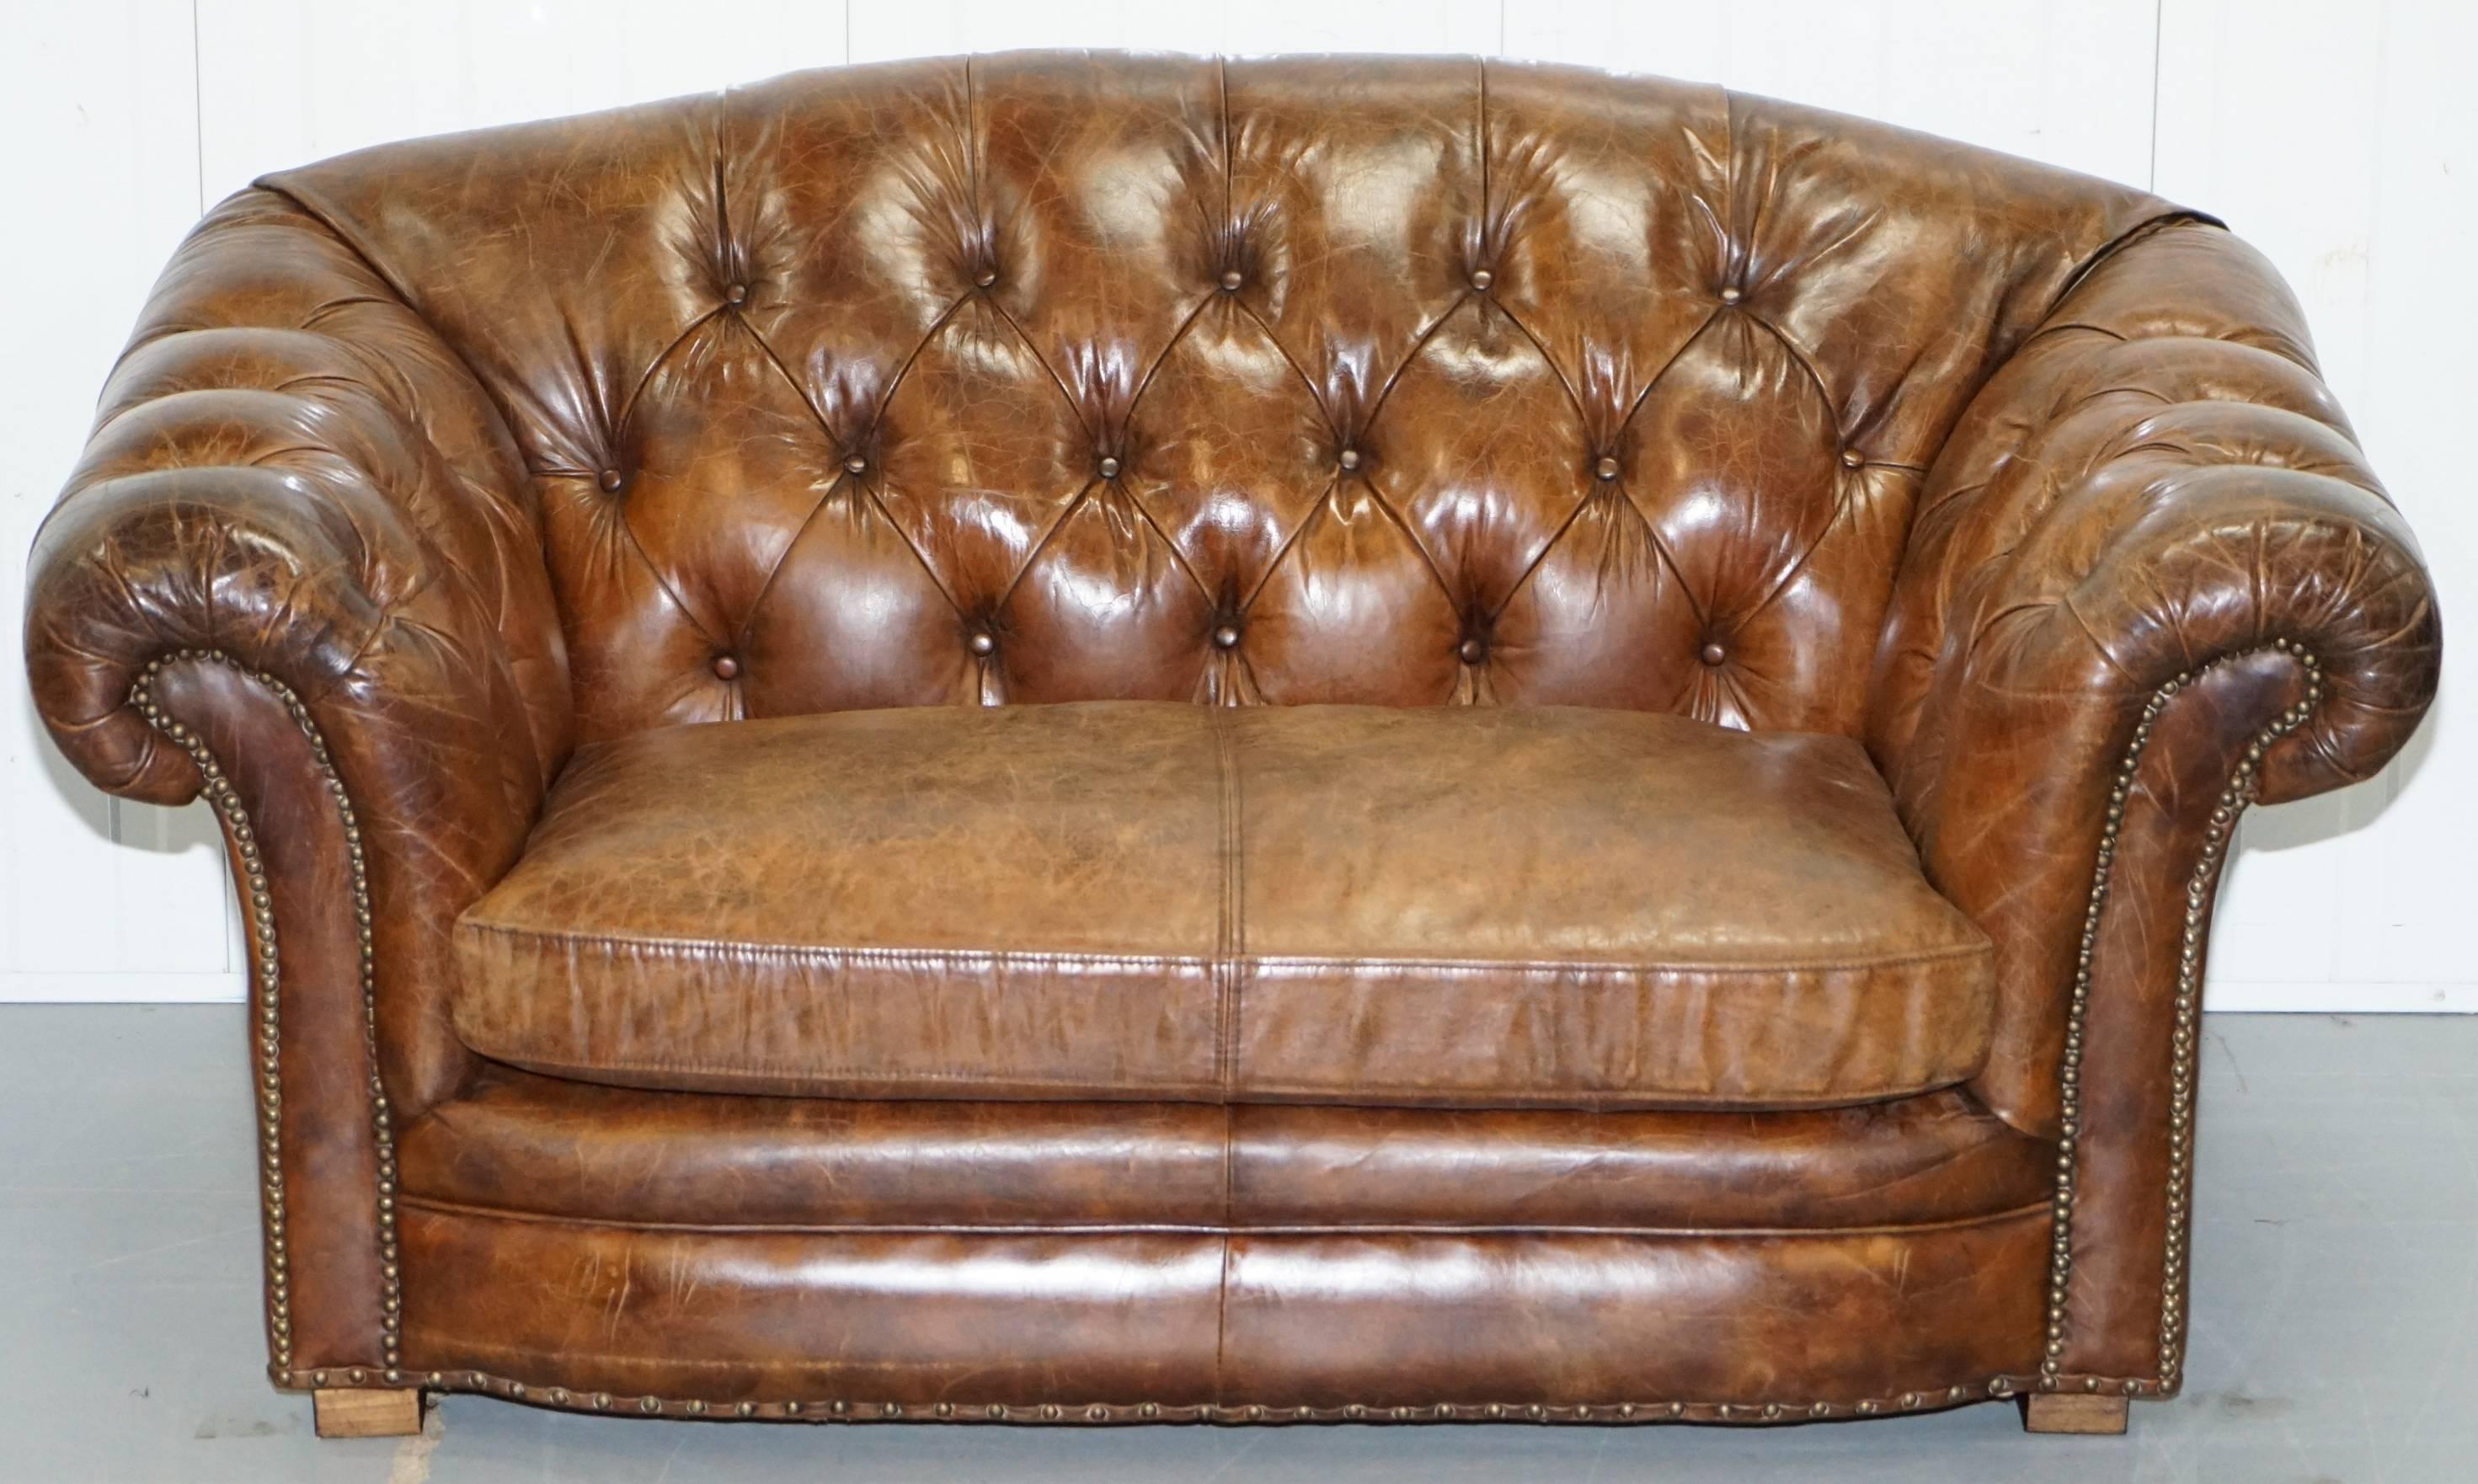 Wimbledon-Furniture

Wimbledon-Furniture is delighted to offer for auction this lovely vintage Heritage aged brown leather Halo two seater Chesterfield club sofa

Please note the delivery fee listed is just a guide, for an accurate quote please